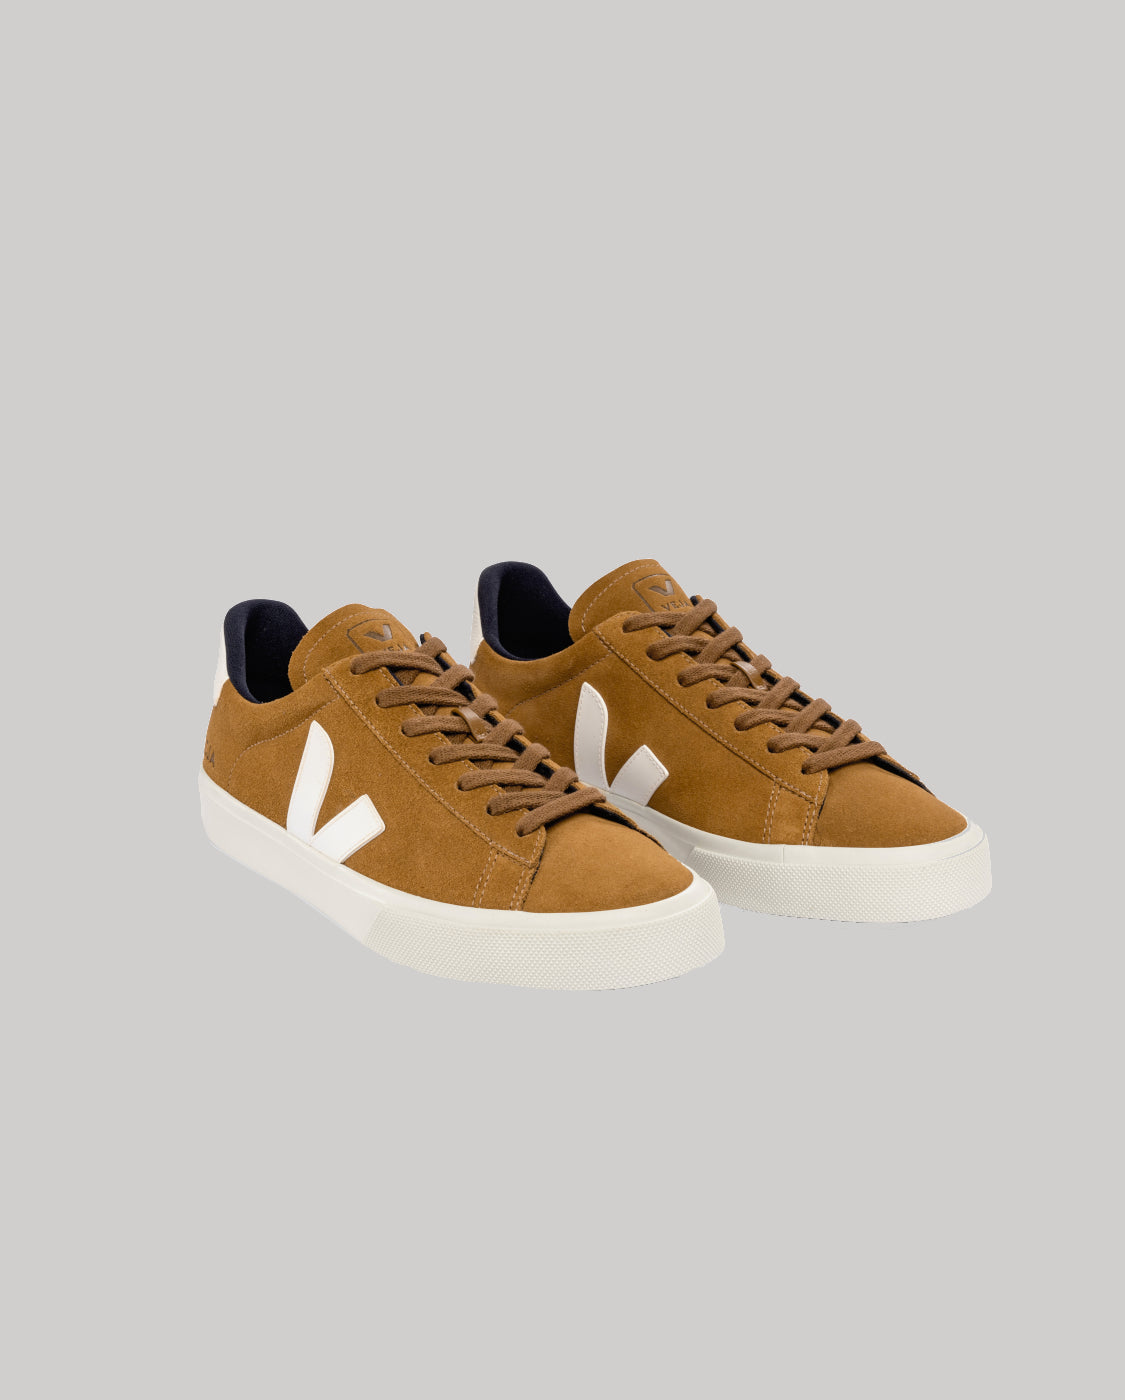 Veja Suede Camel White Campo Sneakers